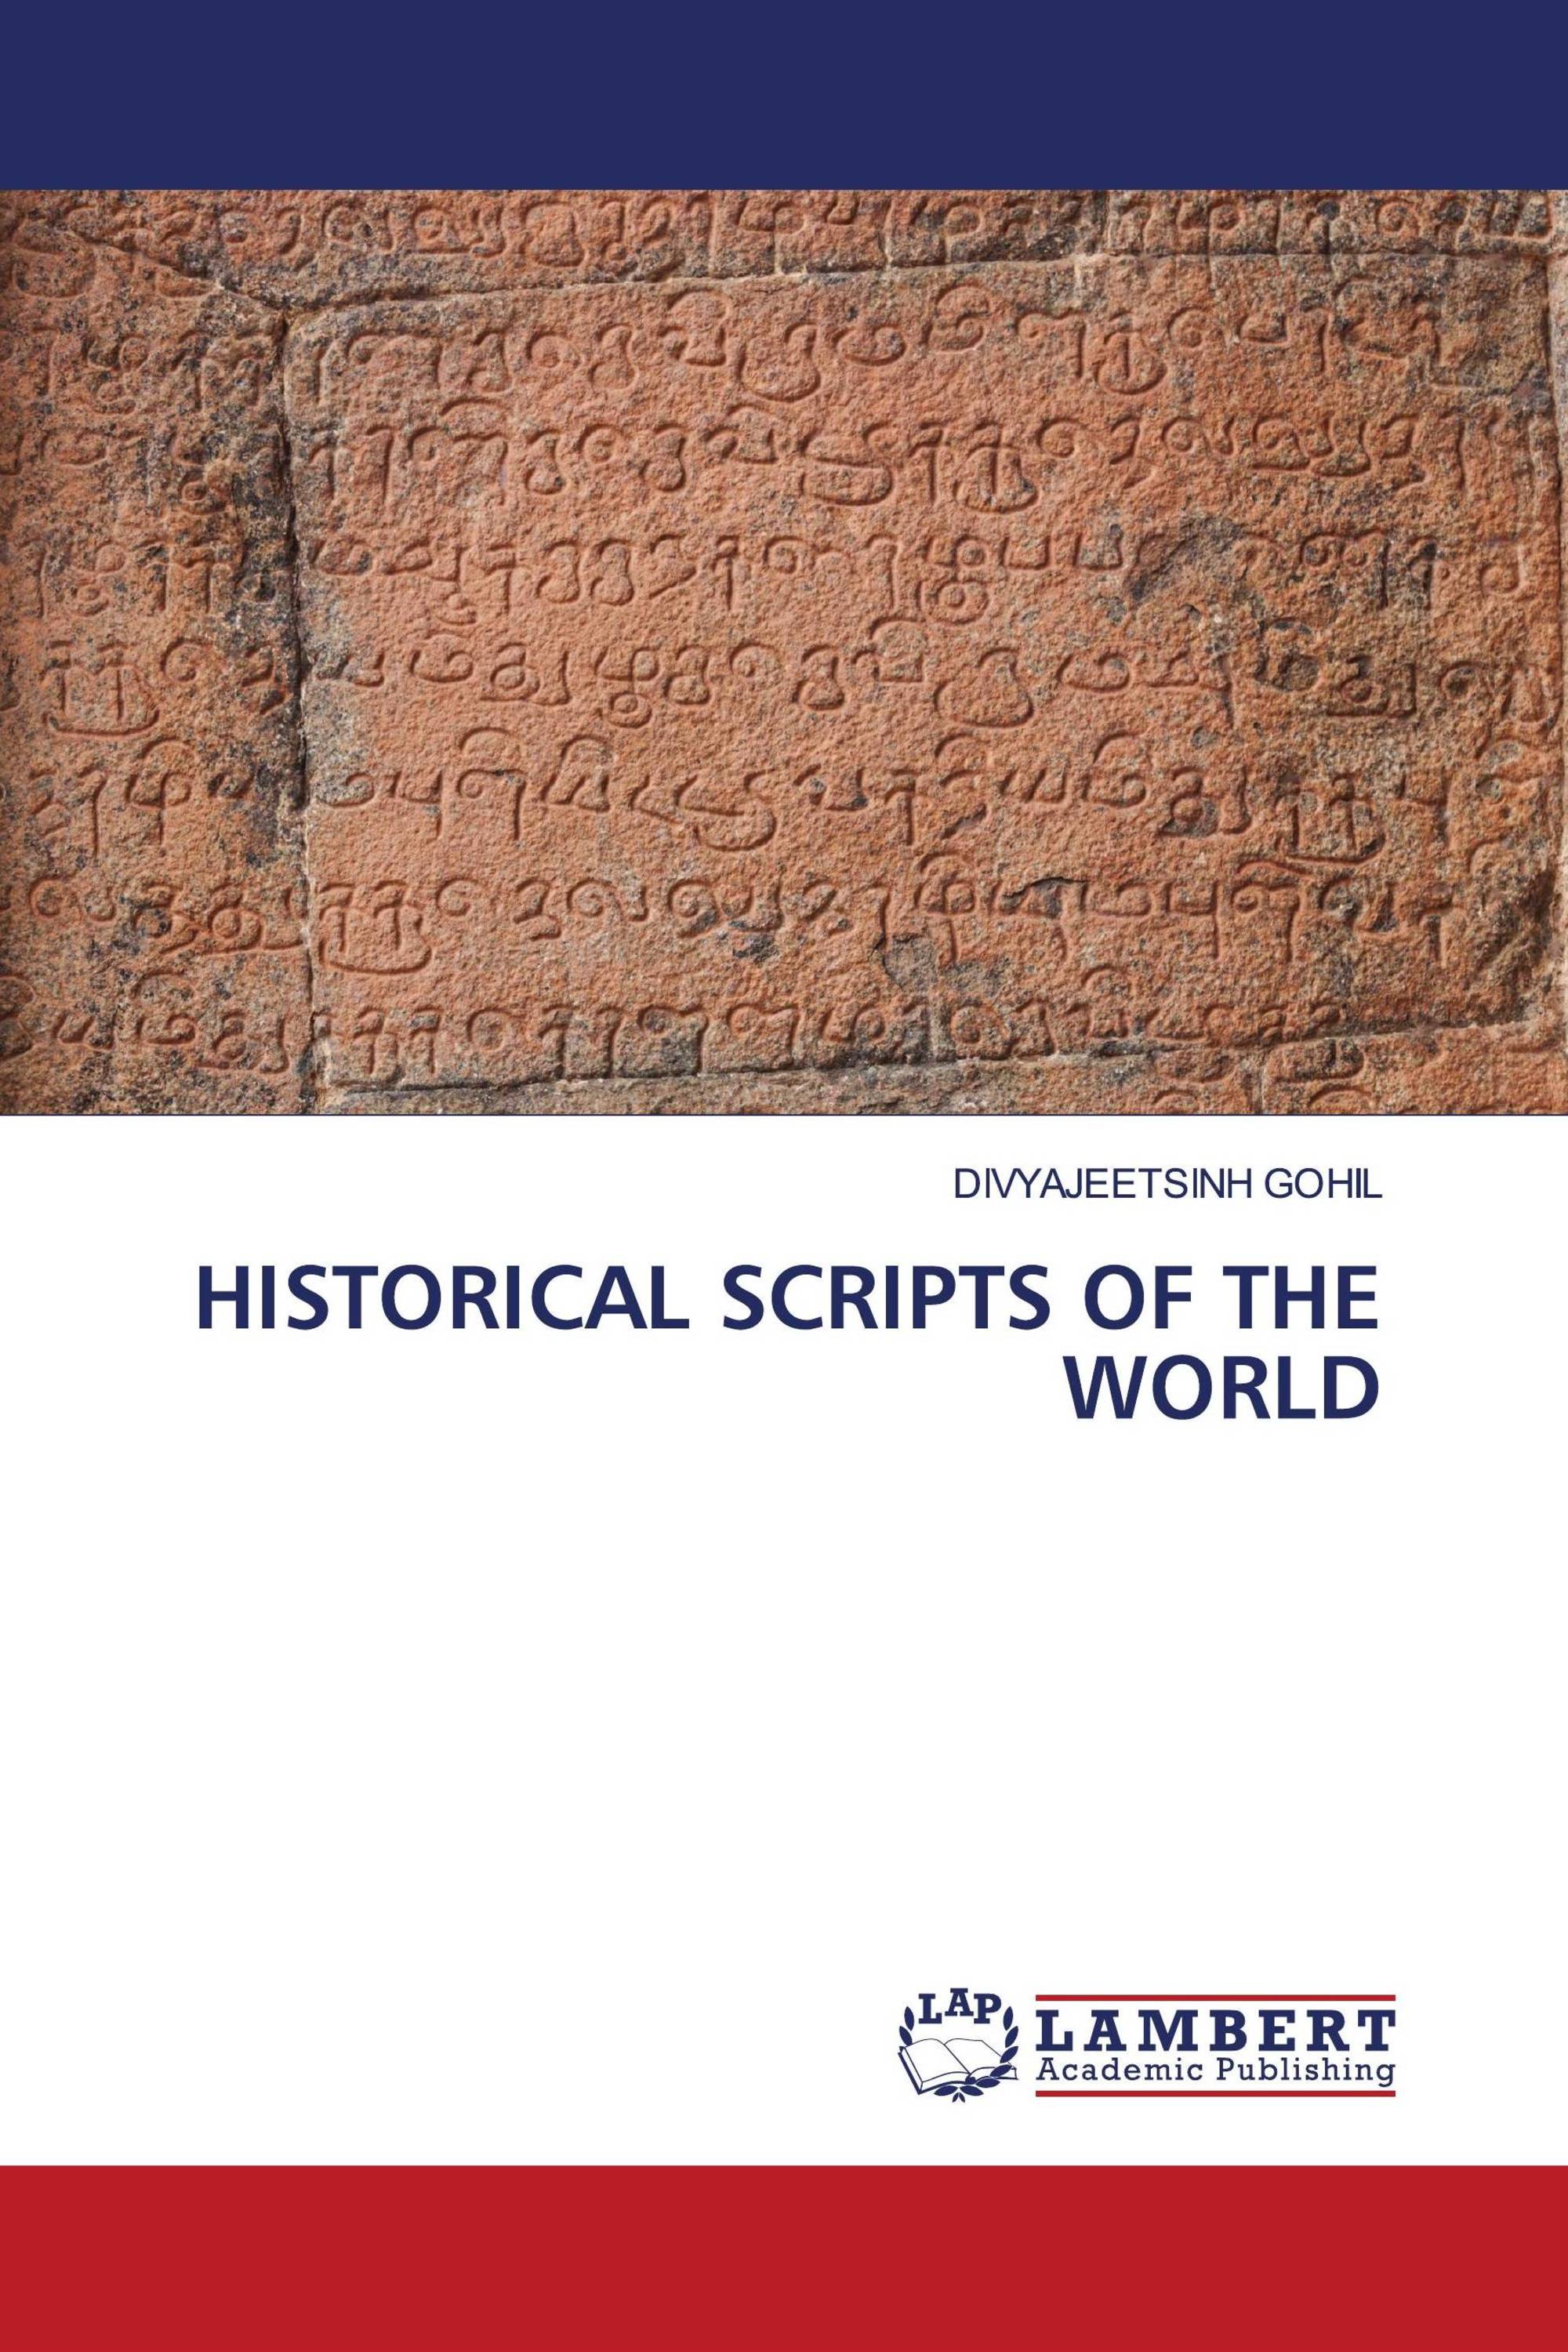 HISTORICAL SCRIPTS OF THE WORLD